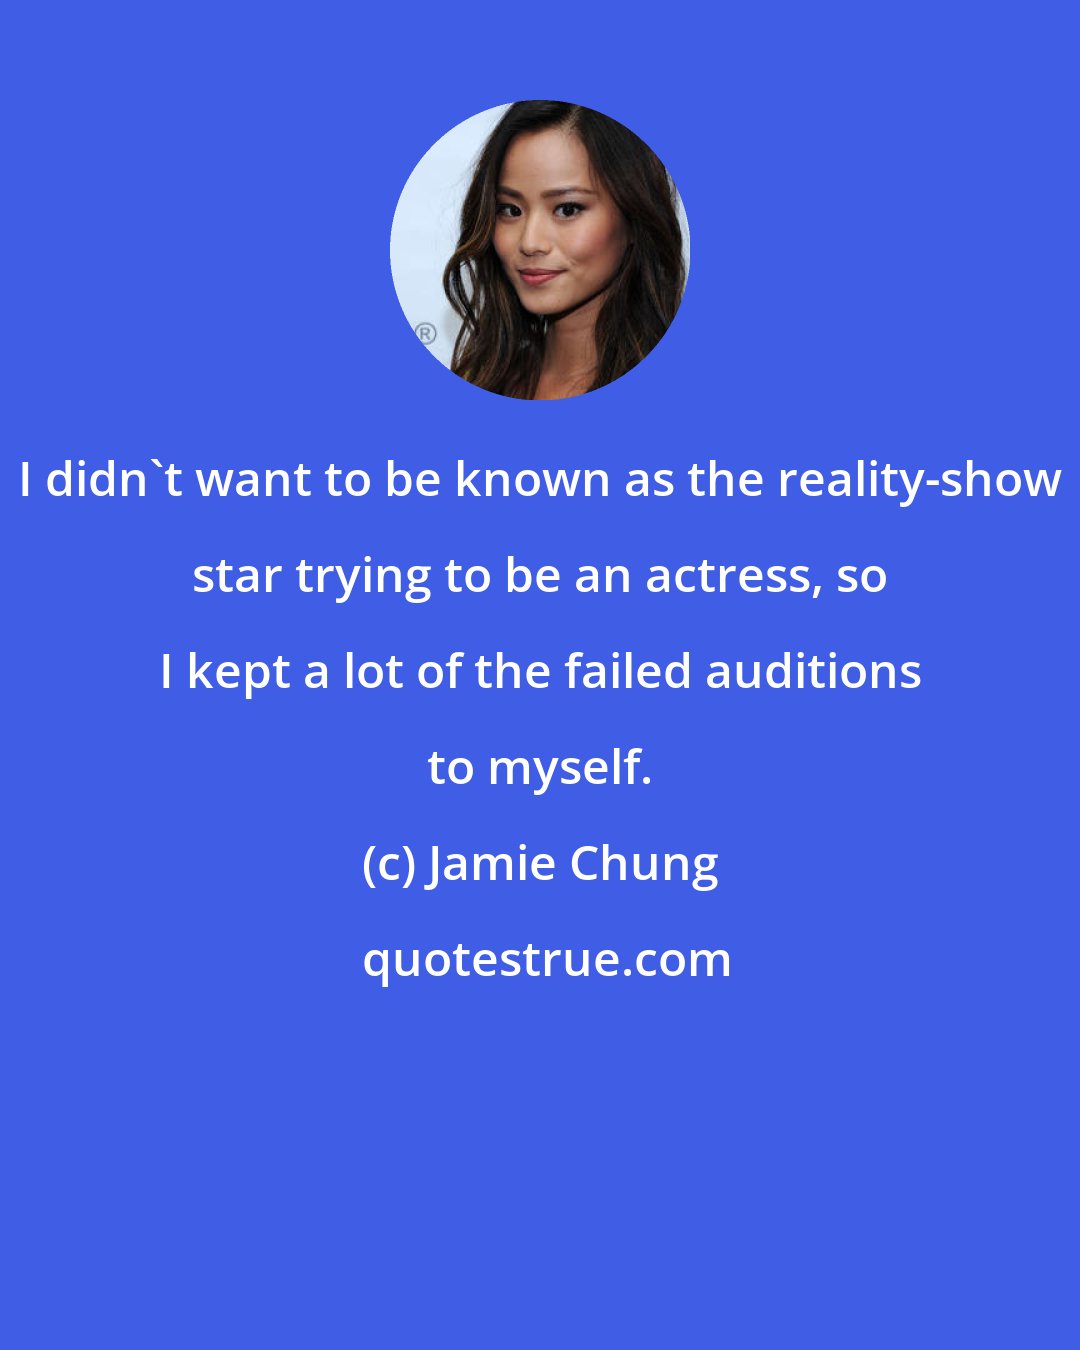 Jamie Chung: I didn't want to be known as the reality-show star trying to be an actress, so I kept a lot of the failed auditions to myself.